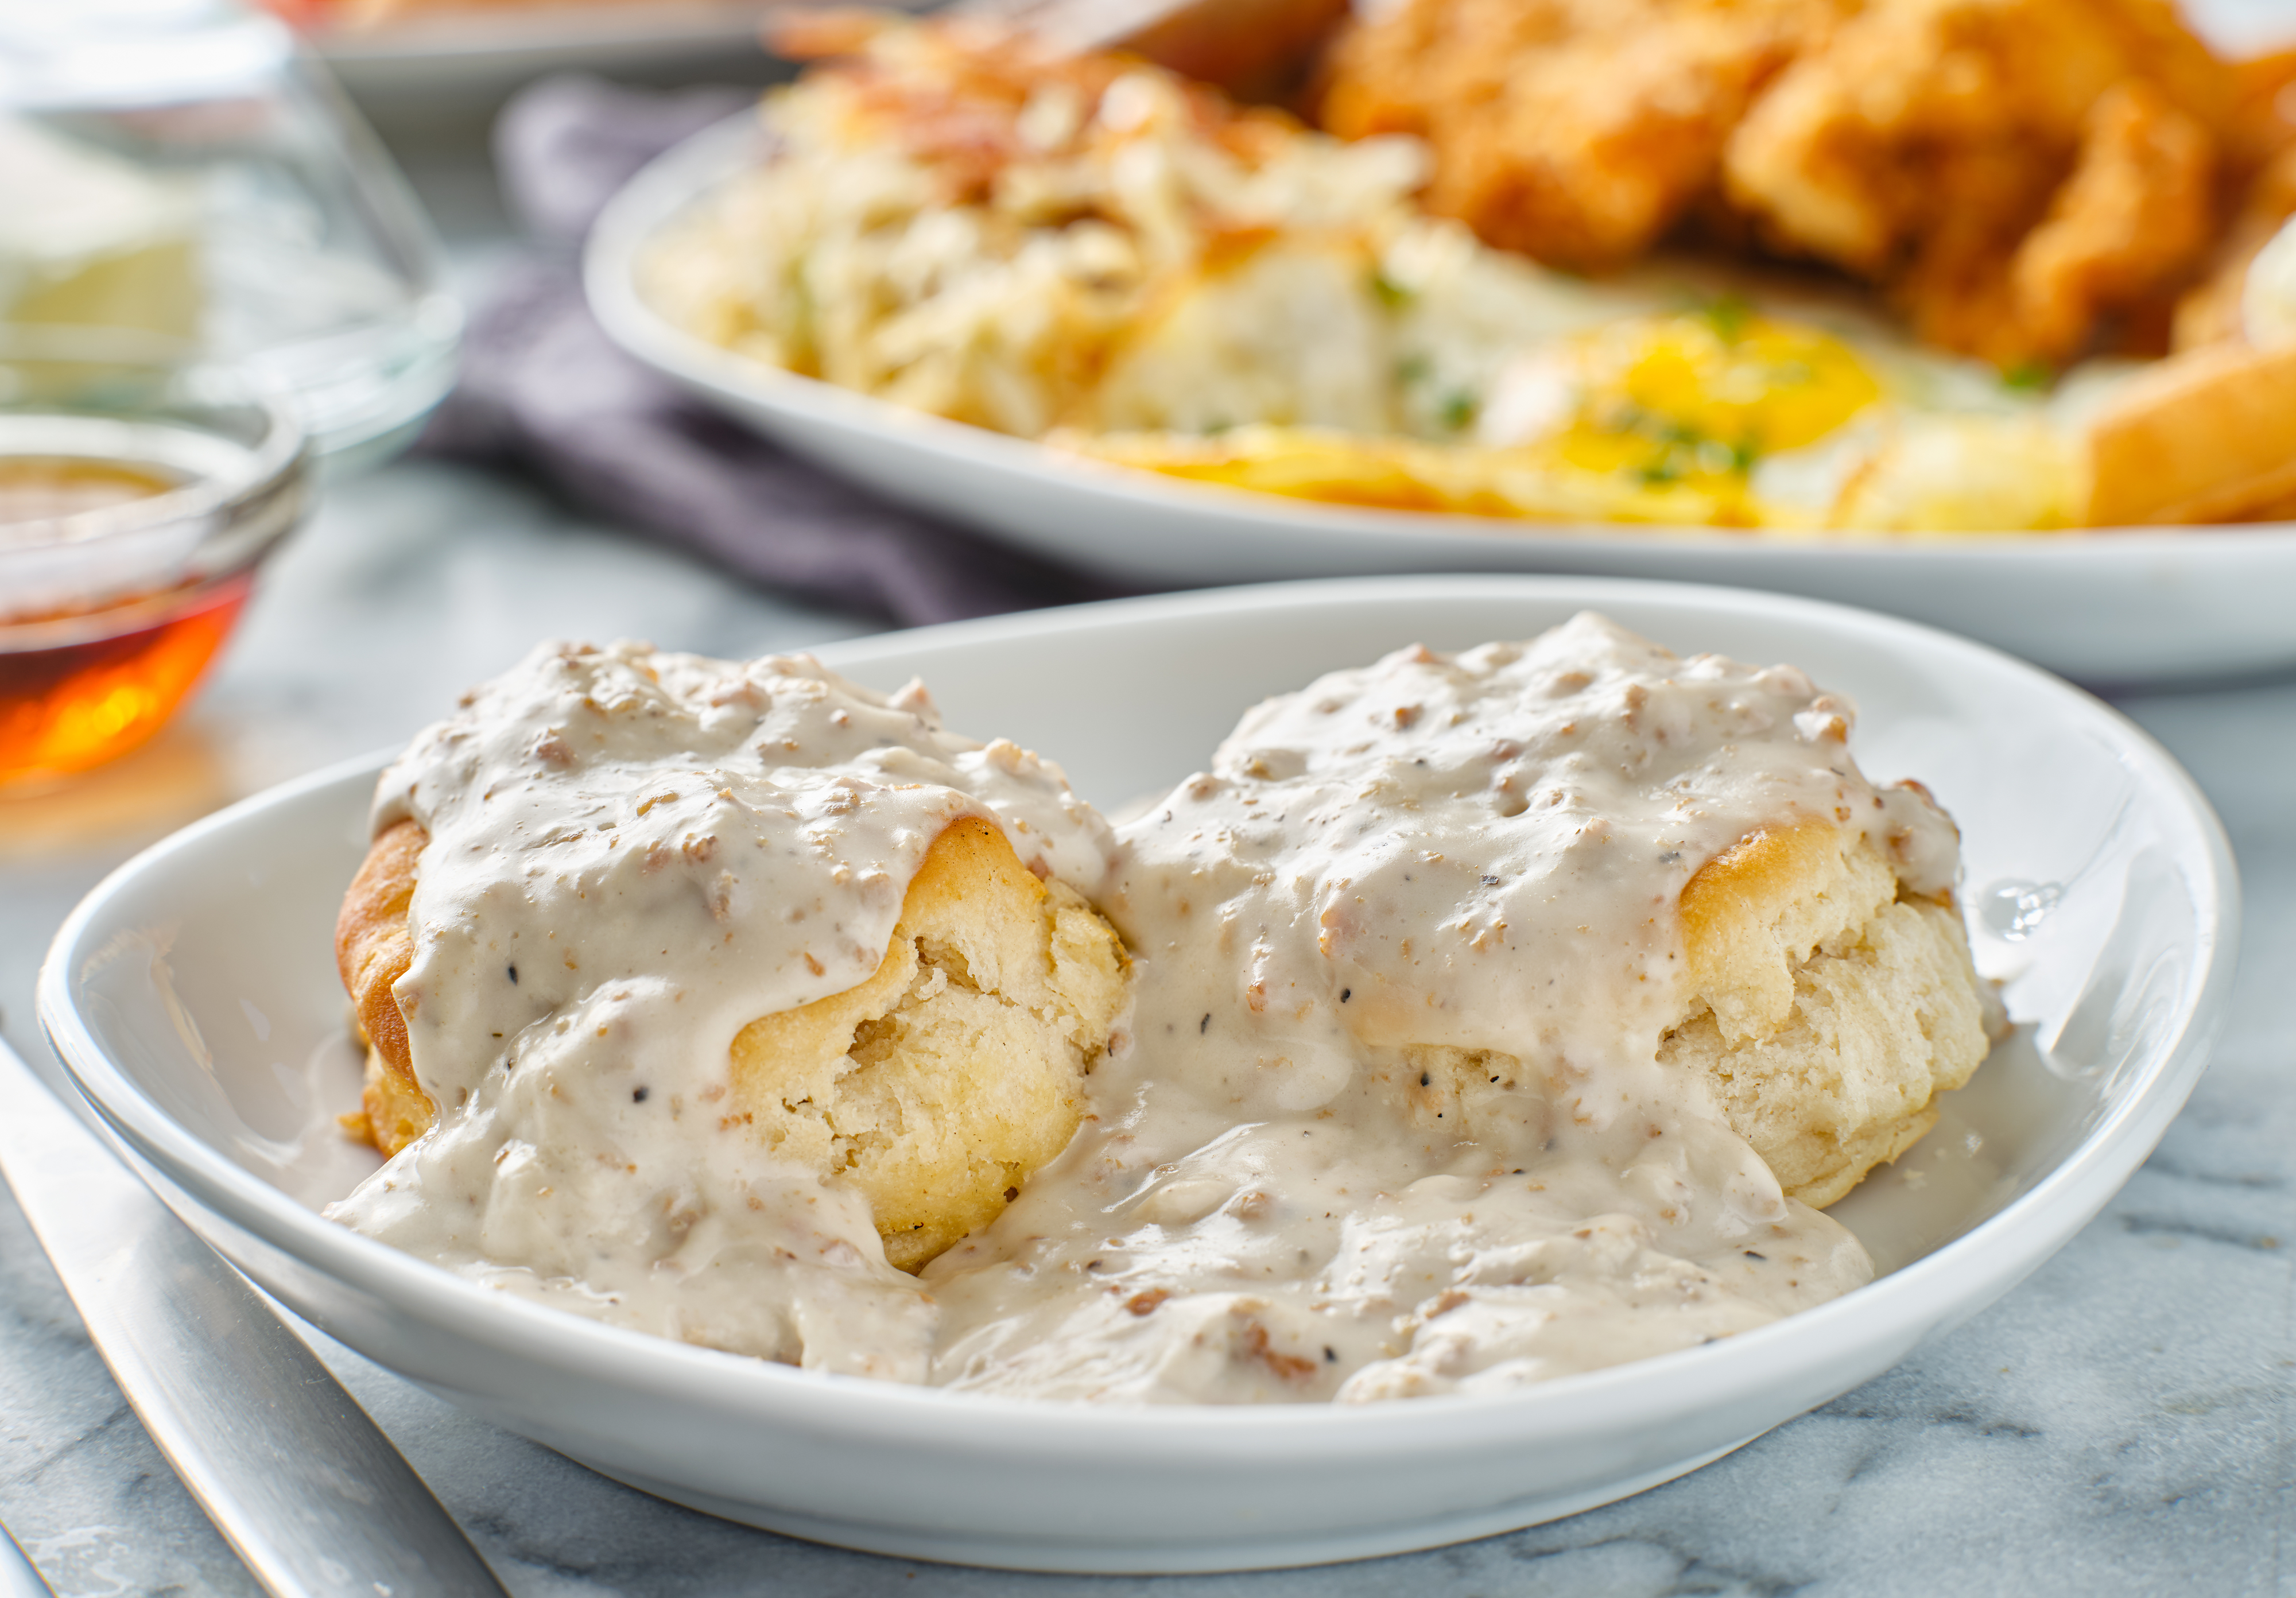 plate of biscuits and gravy